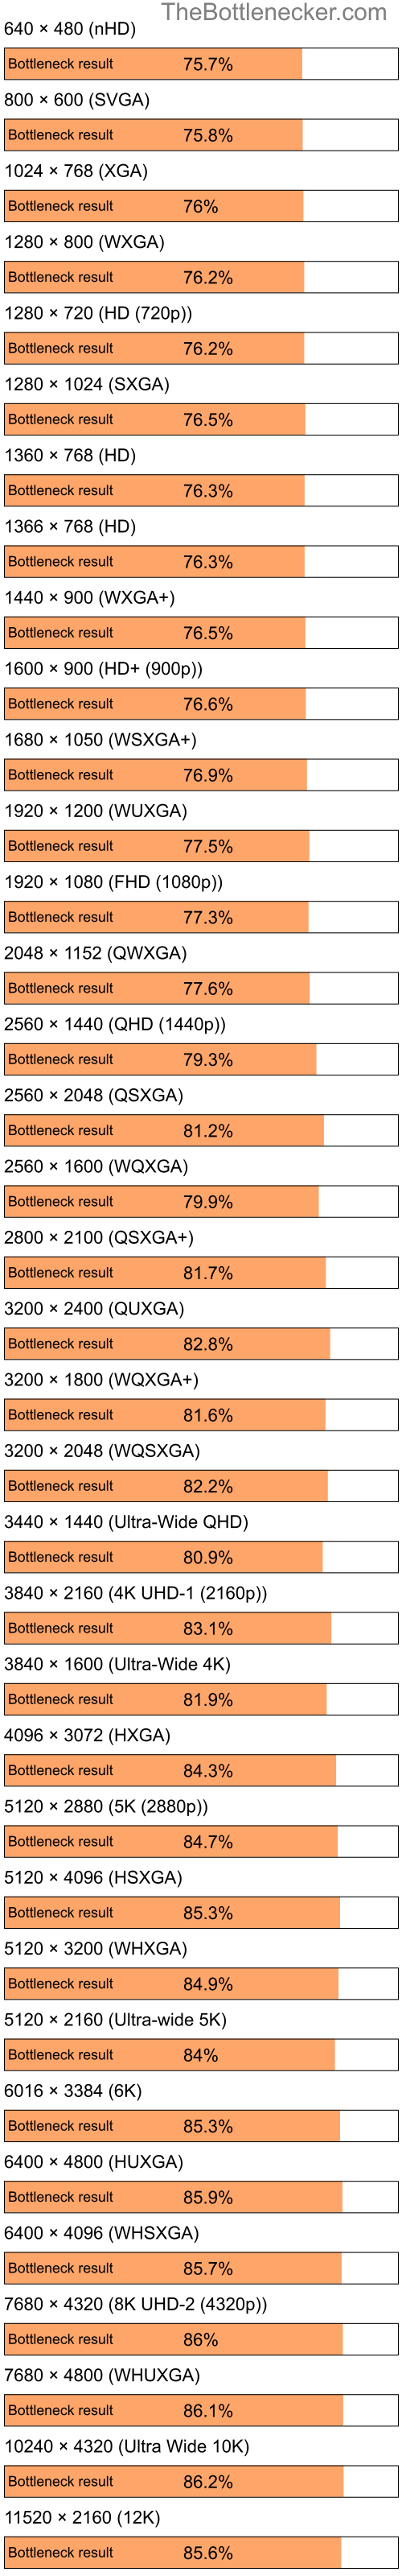 Bottleneck results by resolution for Intel Celeron and AMD Mobility Radeon 9700 in General Tasks